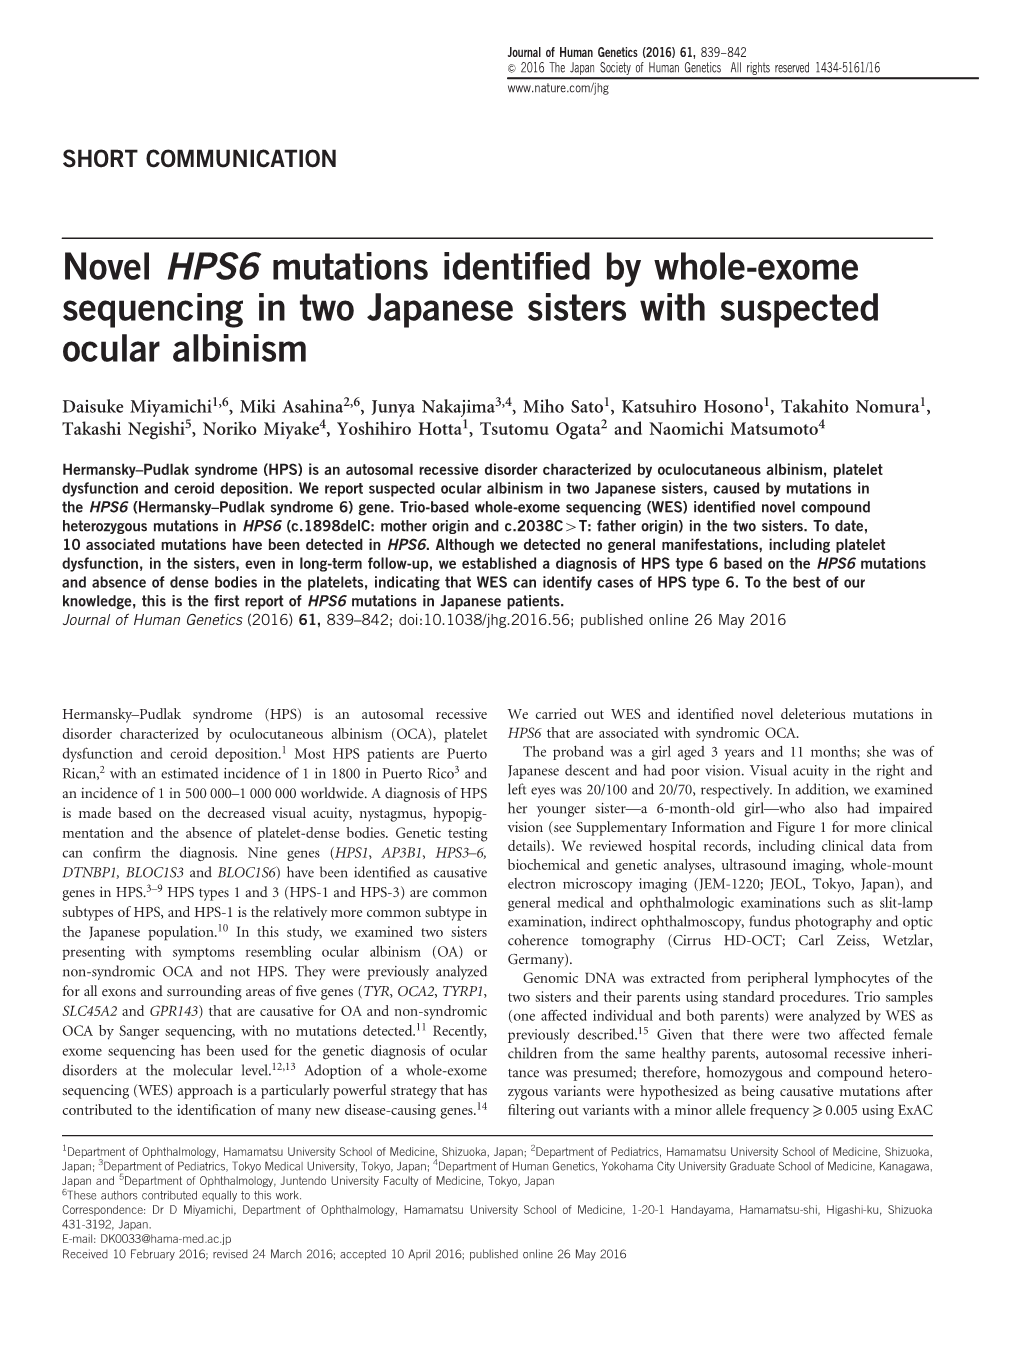 Novel HPS6 Mutations Identified by Whole-Exome Sequencing in Two